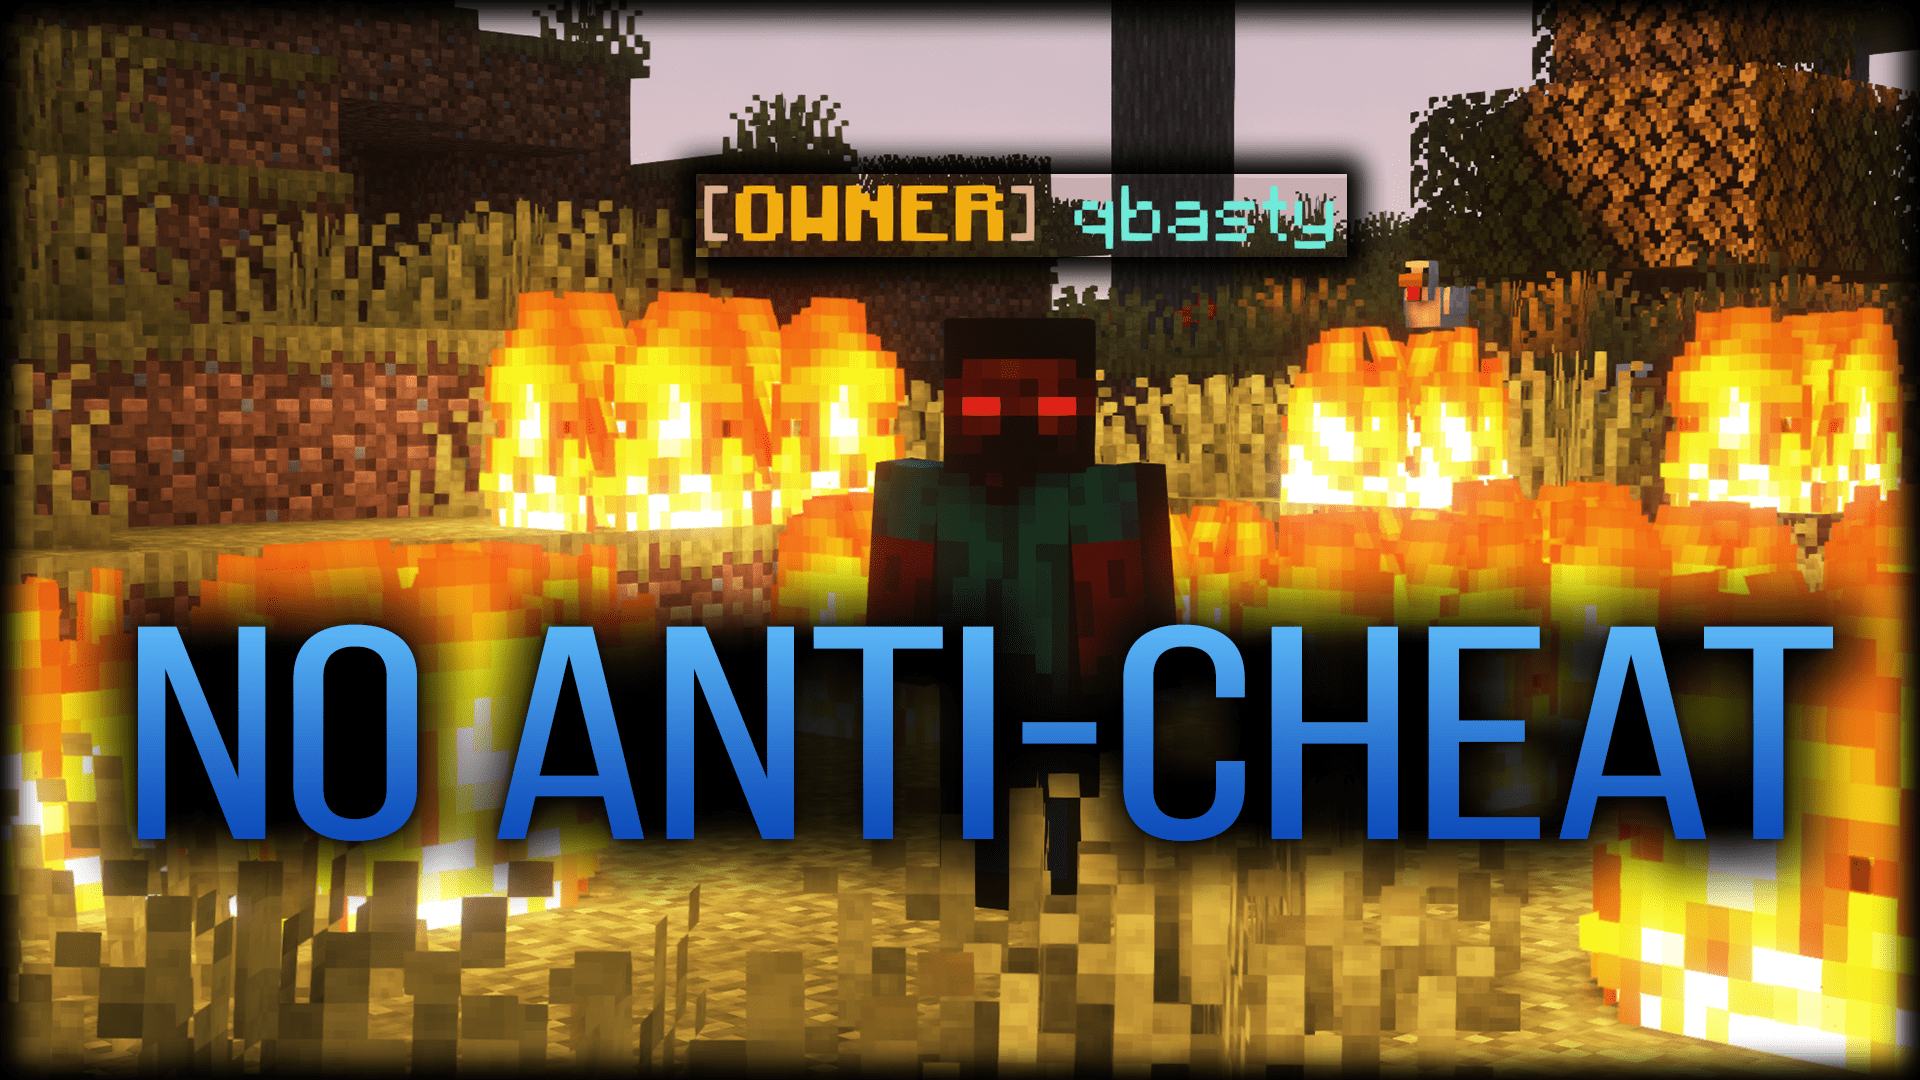 Cover Image for Anti-Cheat will be disabled for 24 hours...